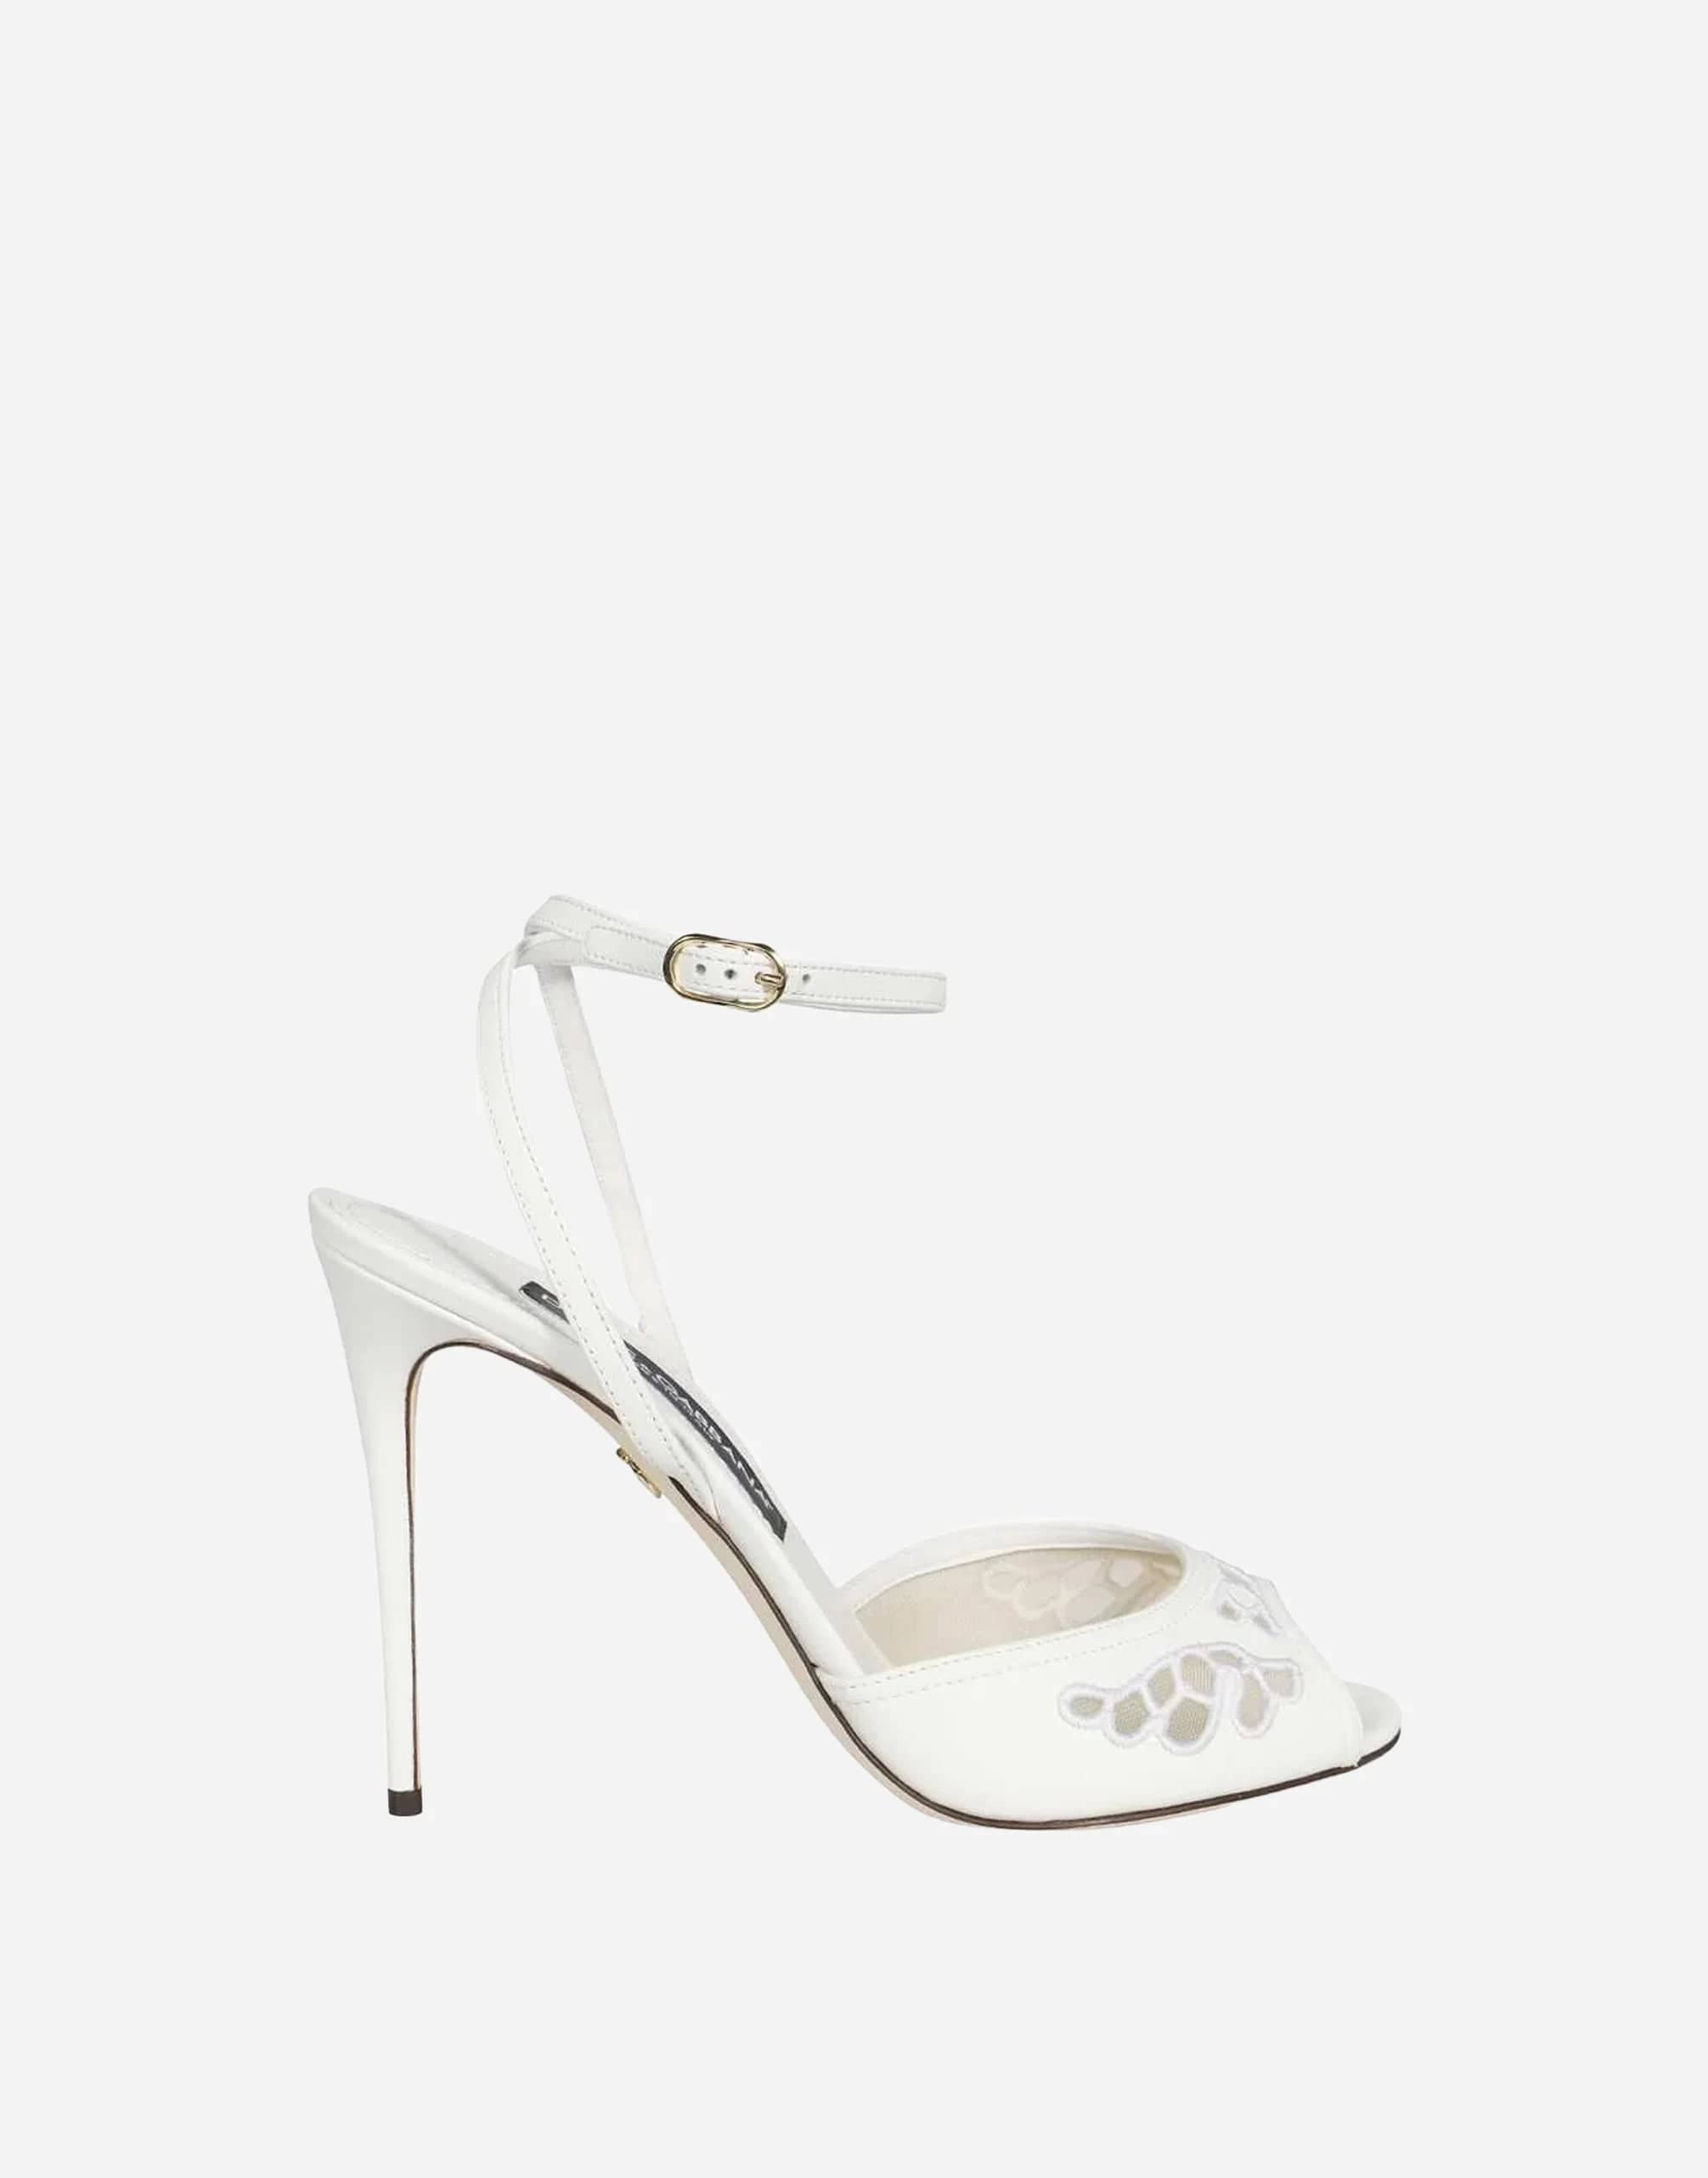 Dolce & Gabbana Broderie Anglaise Embroidered Sandals